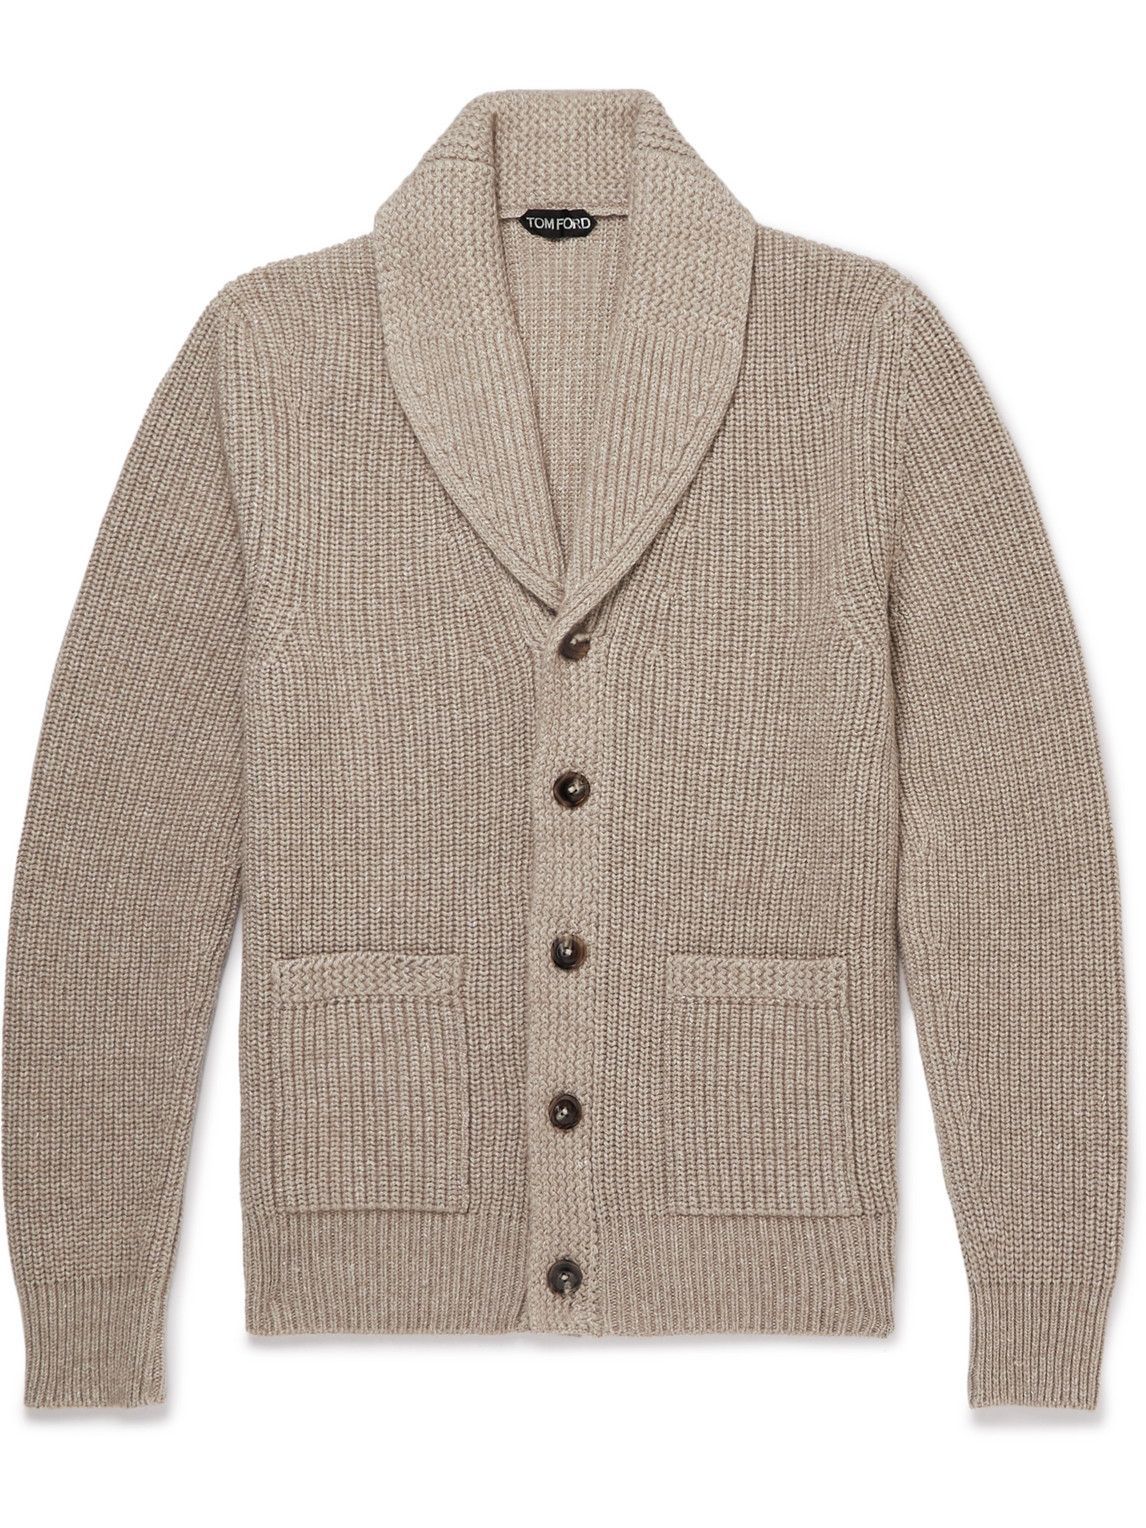 Photo: TOM FORD - Shawl-Collar Ribbed-Knit Cashmere and Linen-Blend Cardigan - Neutrals